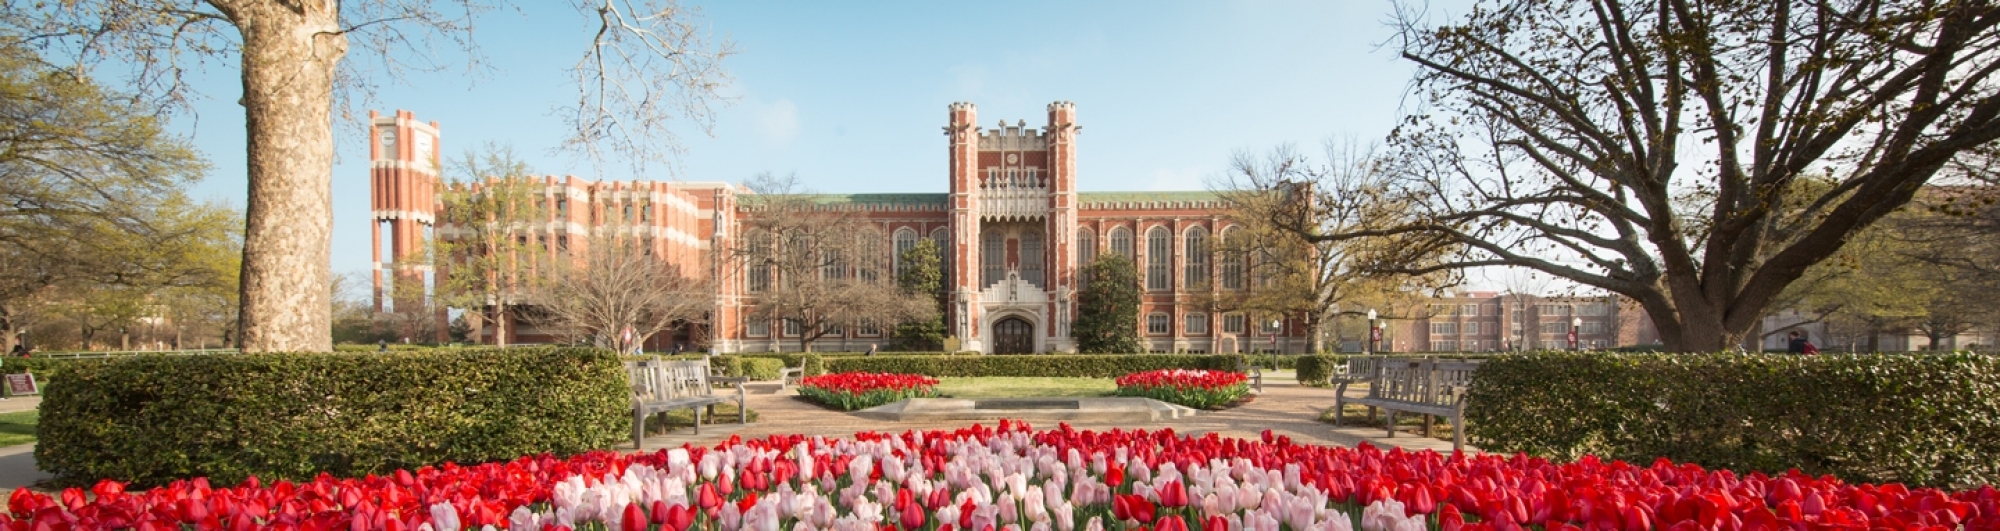 OU Campus Bizzell Flowers